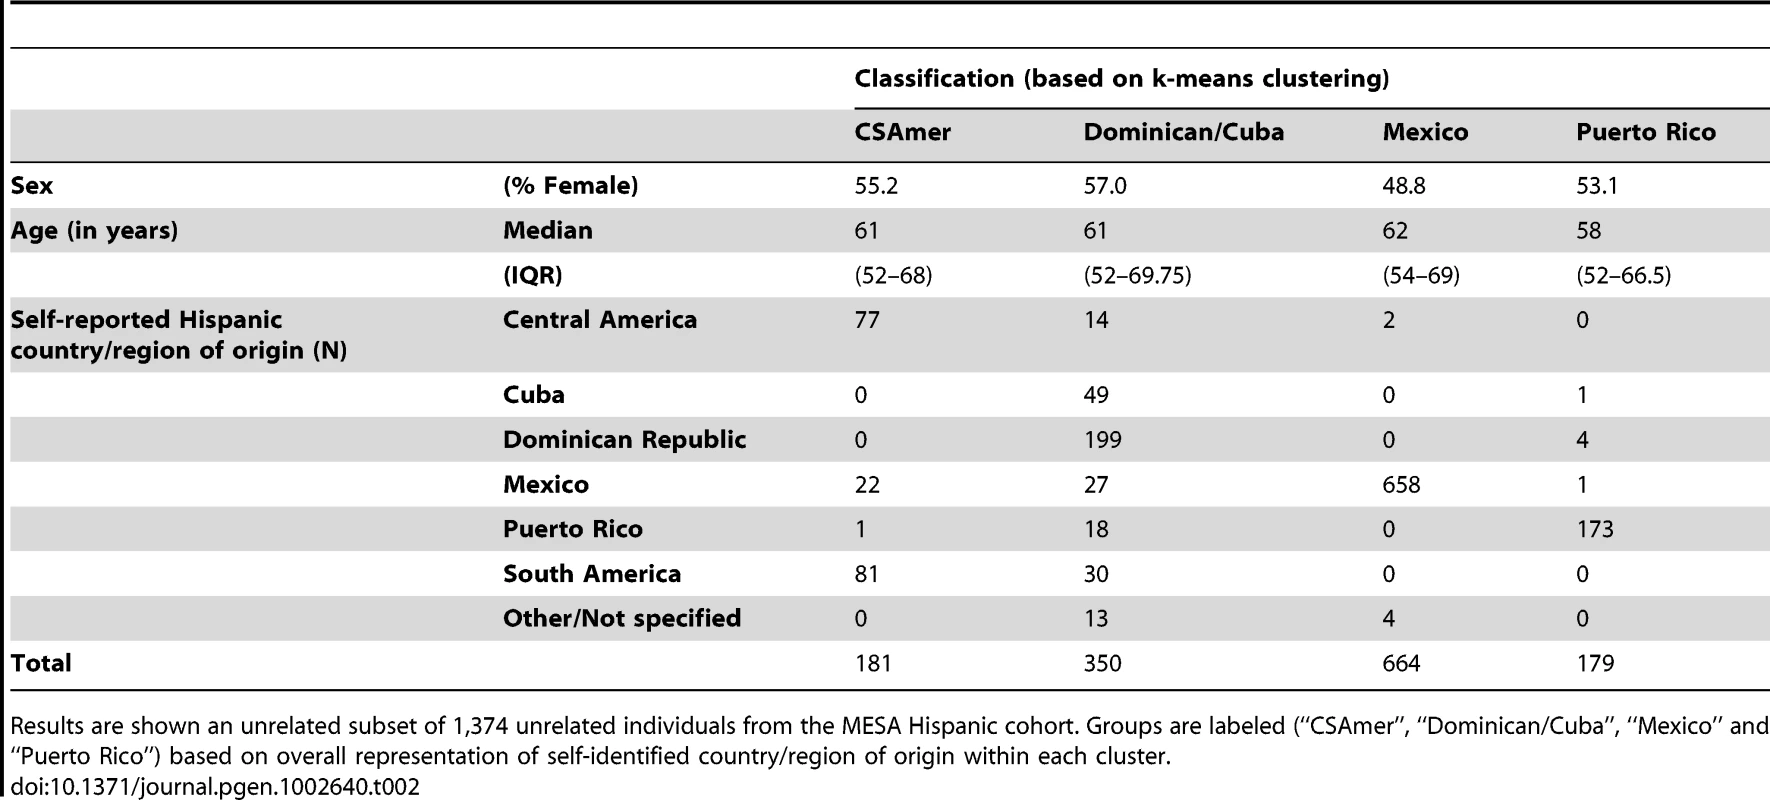 Descriptive summaries of groups obtained by k-means cluster analysis of the first four principal components of ancestry for individuals of self-identified Hispanic origin from the Multi-Ethnic Study of Atherosclerosis (MESA).